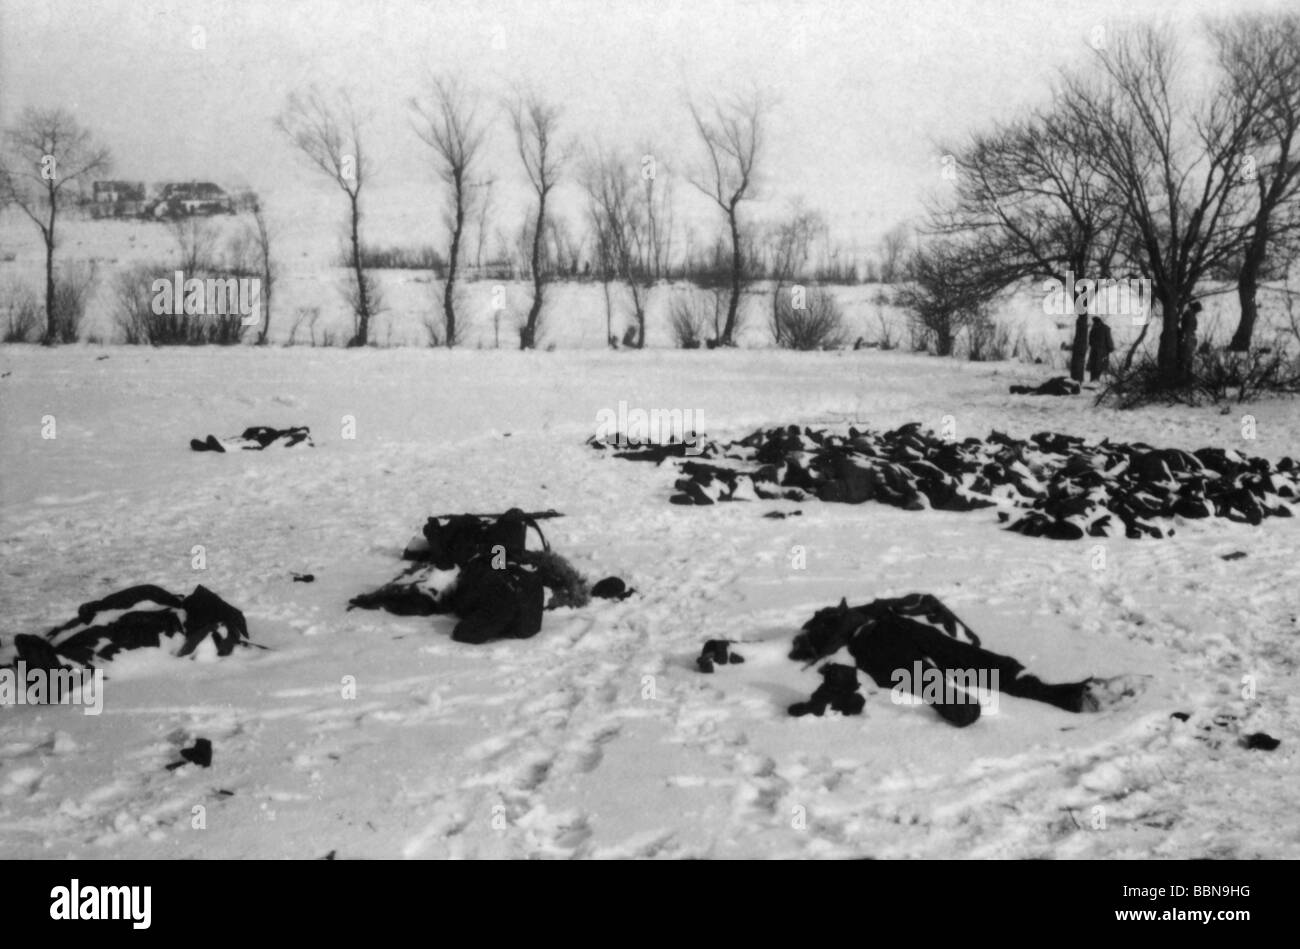 events, Second World War / WWII, Russia 1944 / 1945, fallen Soviet soldiers after a German counterattack near Britskoye, Ukraine, 27.1.1944, corpses, dead bodies, Eastern Front, Red Army, 20th century, Soviet Union, USSR, historic, historical, death, losses, snow, 1940s, people, Stock Photo